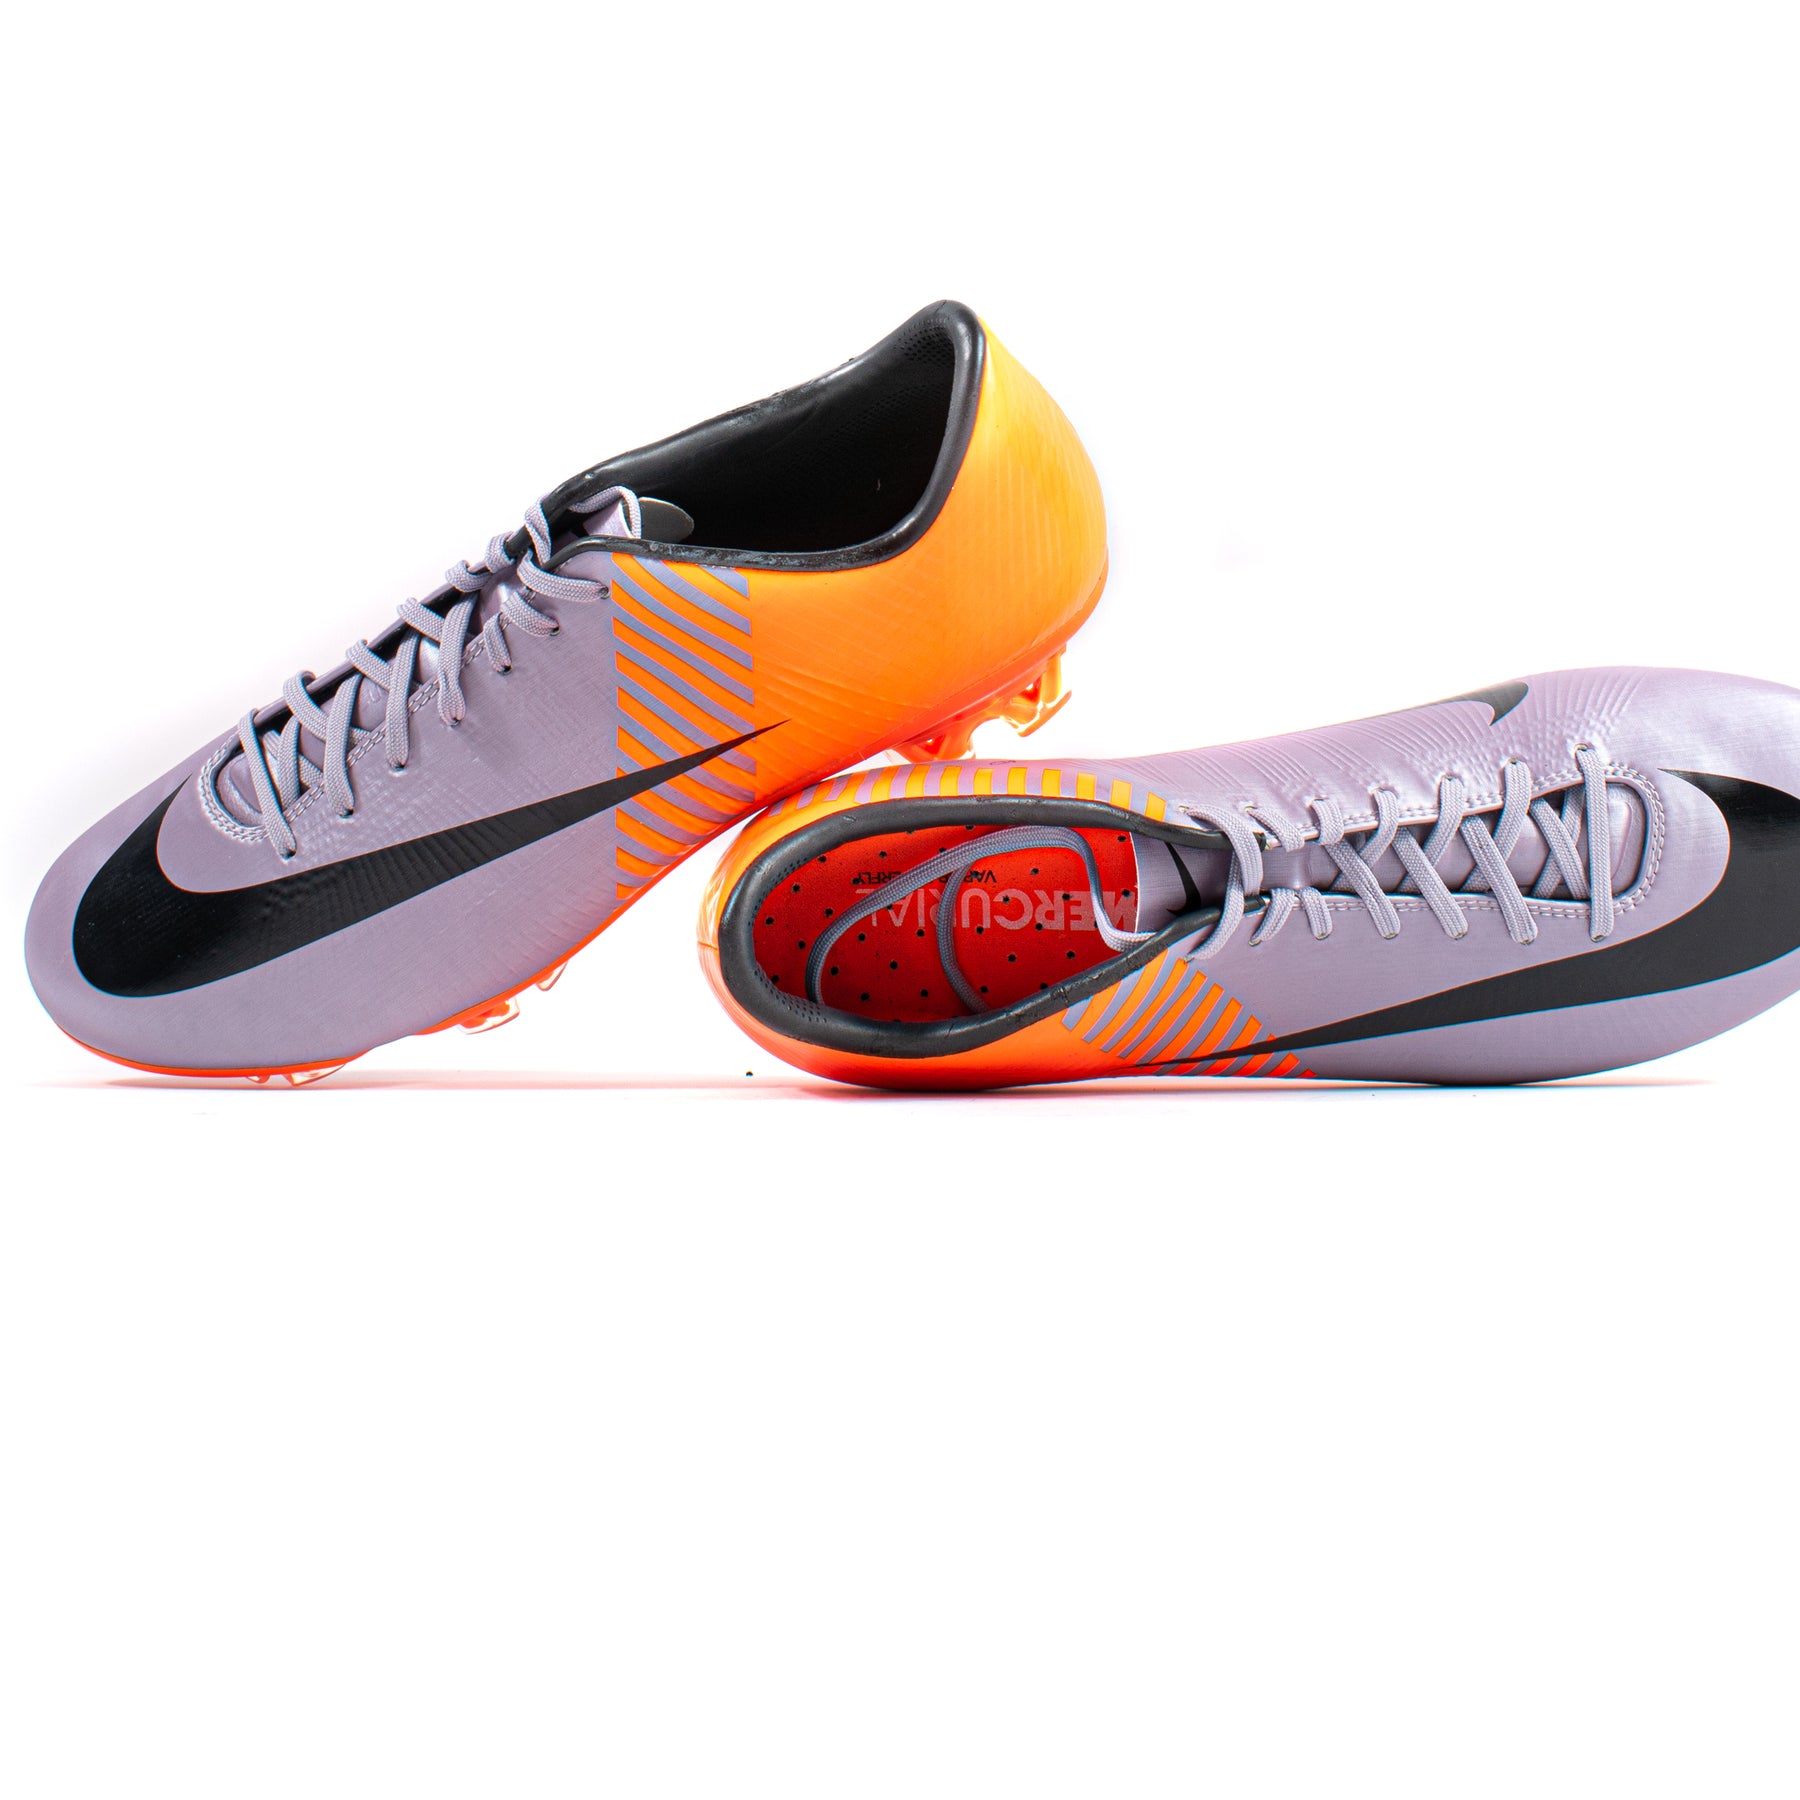 mueble Frase damnificados Nike Mercurial Vapor Superfly II World Cup 2010 FG – Classic Soccer Cleats